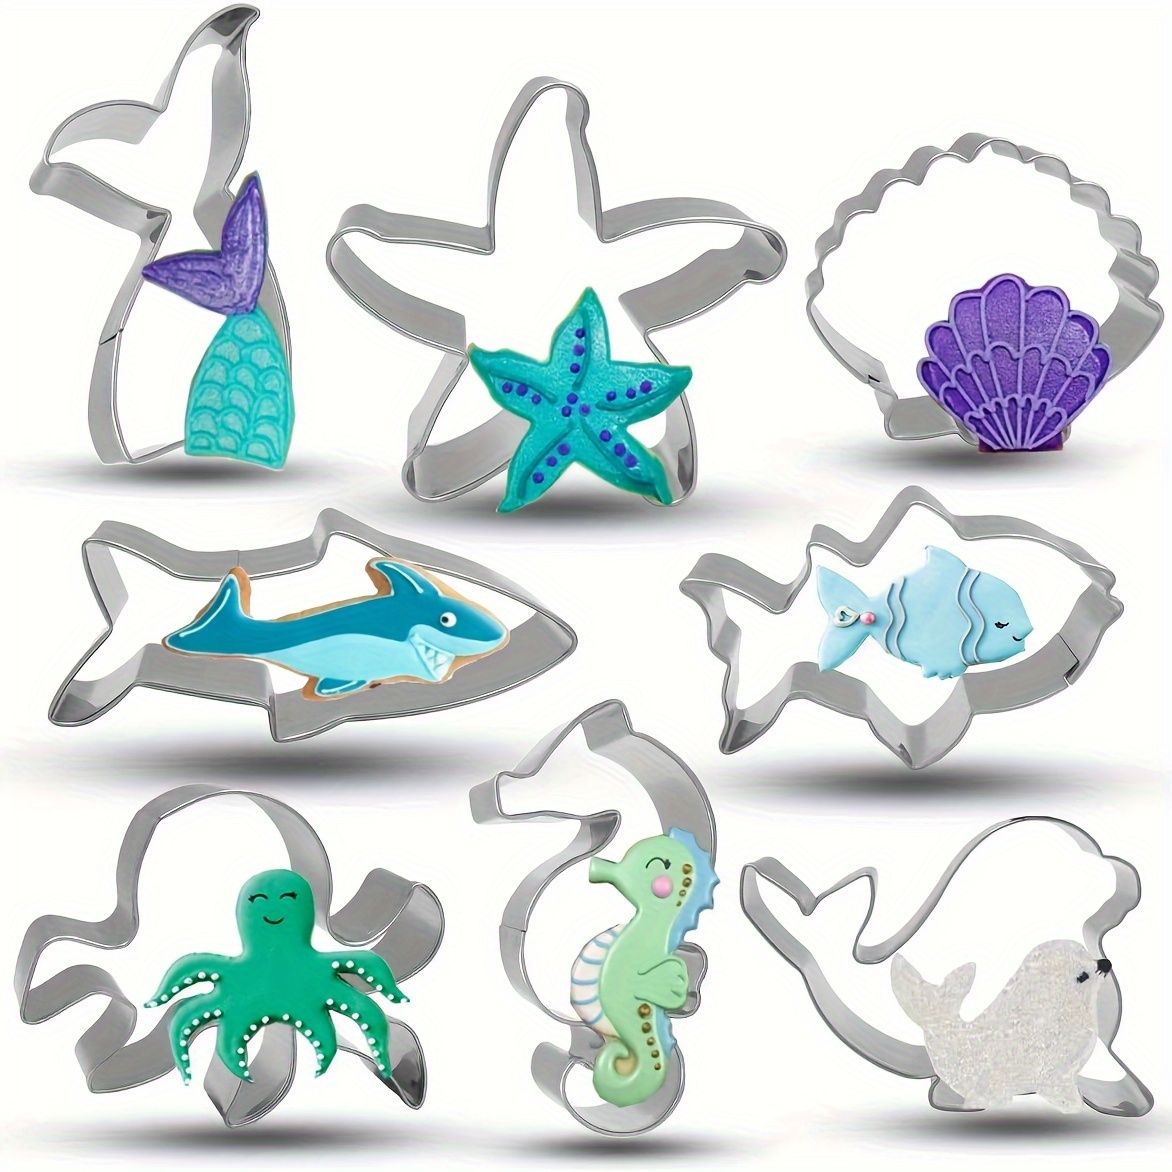 

8pcs, Ocean Animals Stainless Steel Cookie Cutters, Baking Tool Suitable For Restaurant Kitchen Meal Making A Variety Of Baked , Cakes, Chocolate, Pastries, Fondant Decoration, Fruits, Vegetables